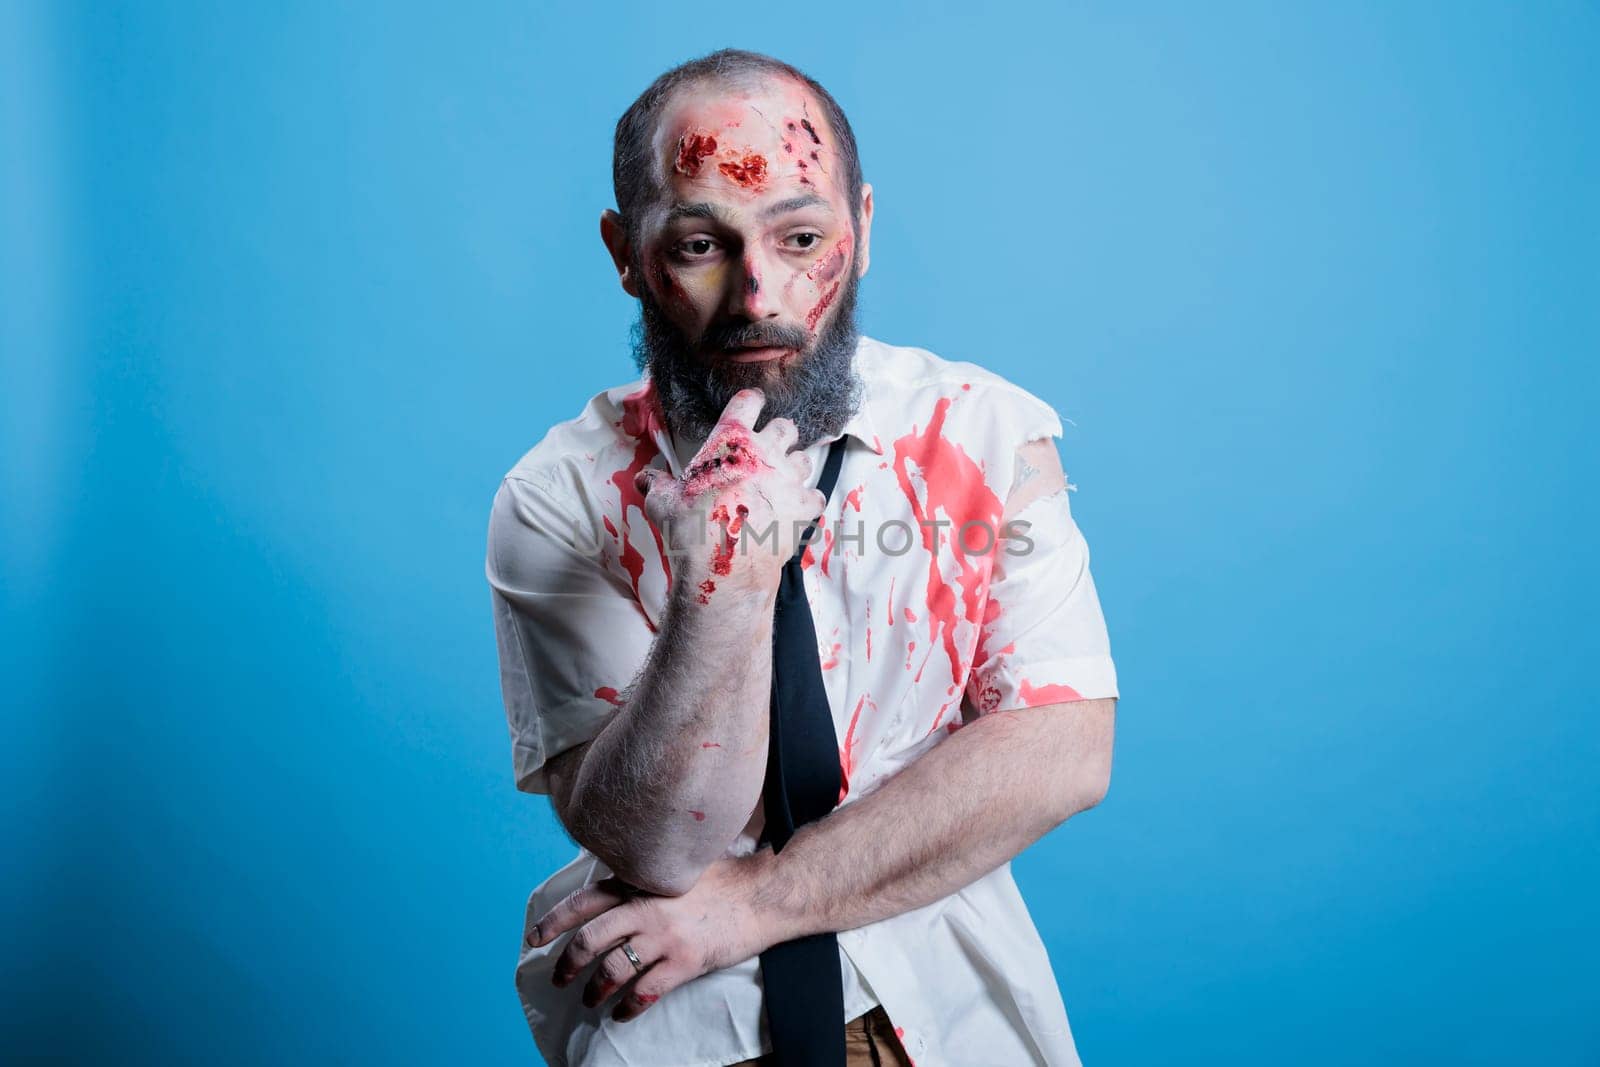 Actor dressed as horror movie brainless zombie repeating lines between scenes on set. Man costumed as mindless infected creature preparing for role, isolated over studio background